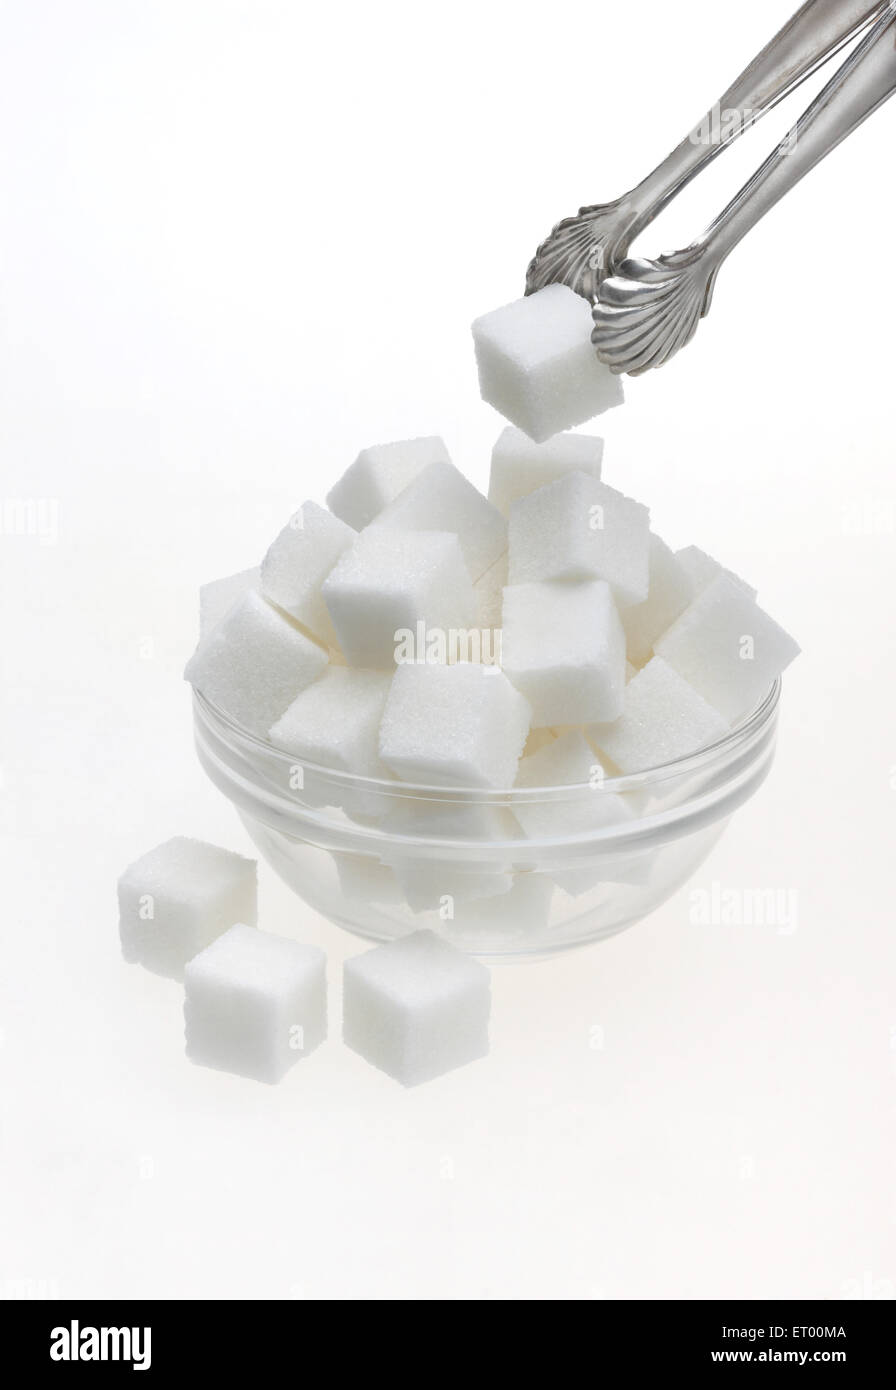 Sugar cubes in a glass bowl with tongs Stock Photo